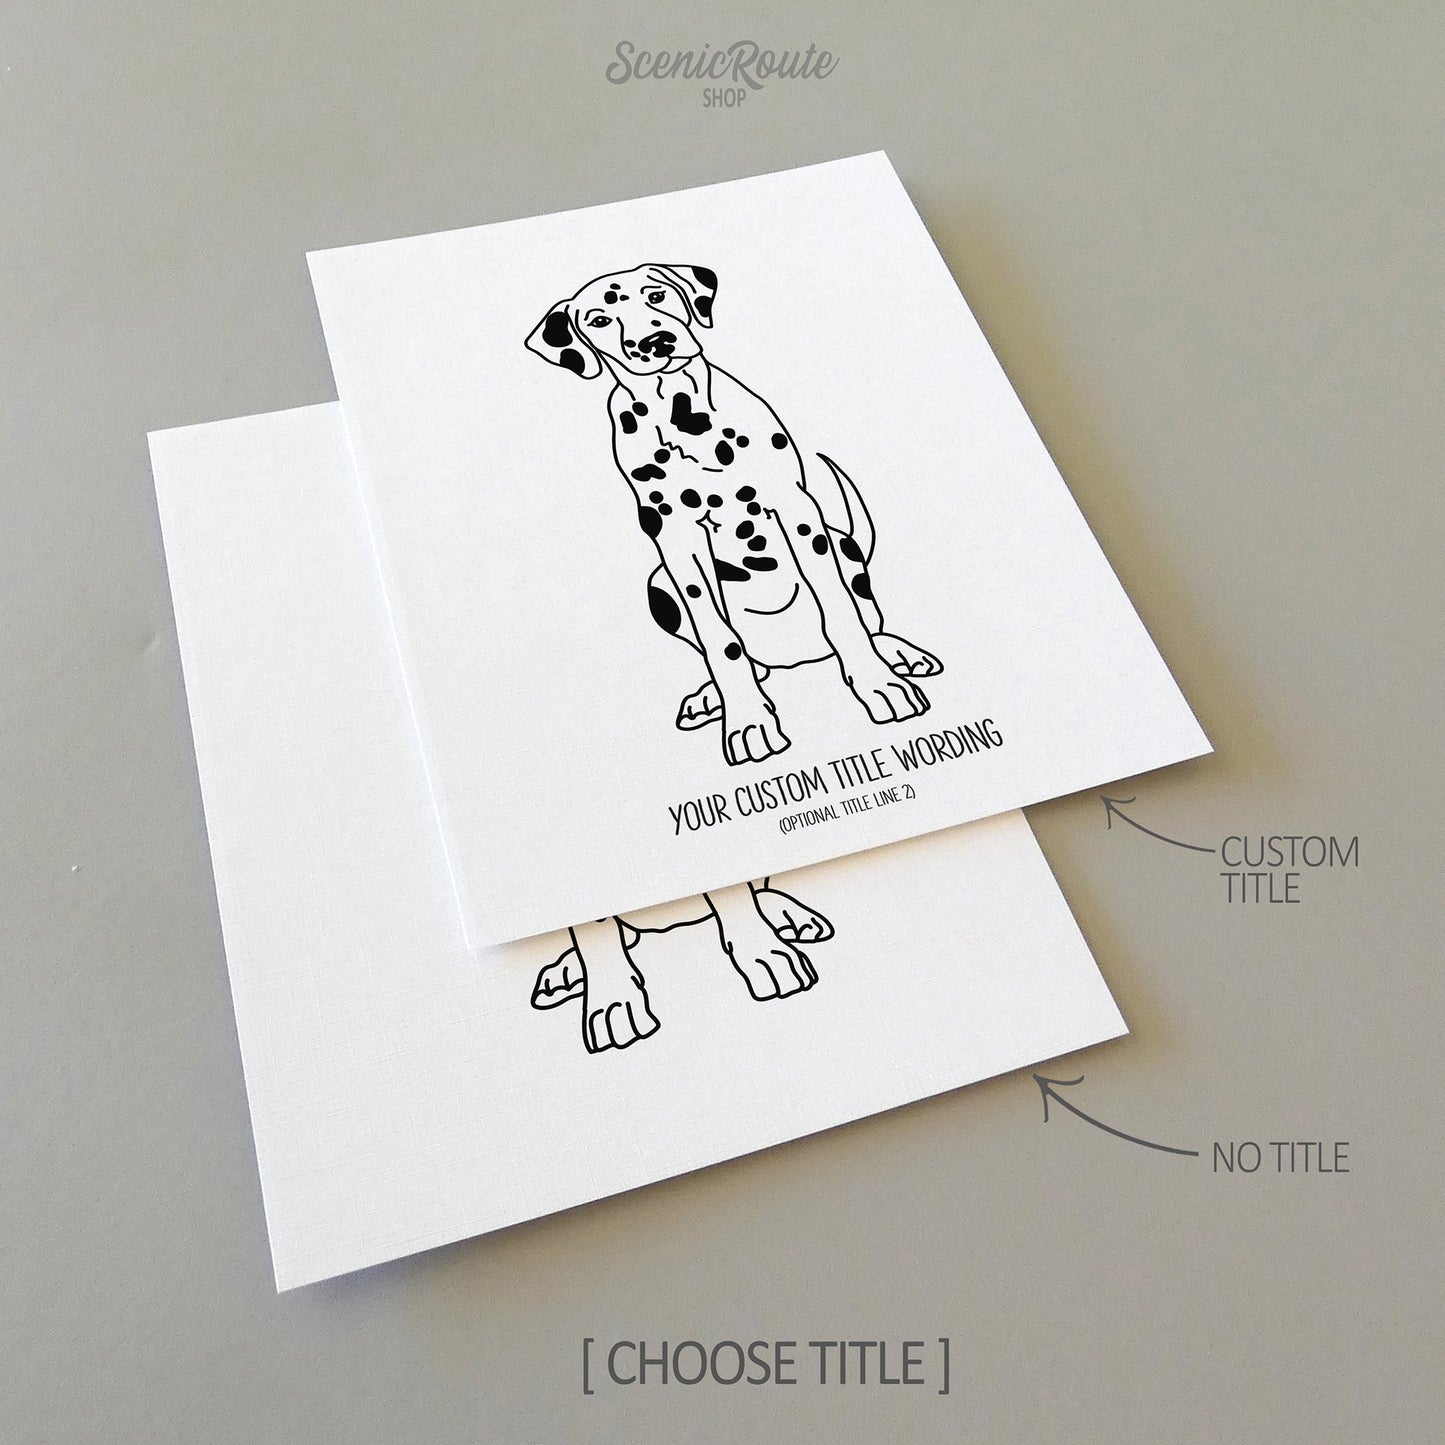 Two drawings of a Dalmatian dog on white linen paper with a gray background.  Pieces are shown with “No Title” and “Custom Title” options to illustrate the available art print options.